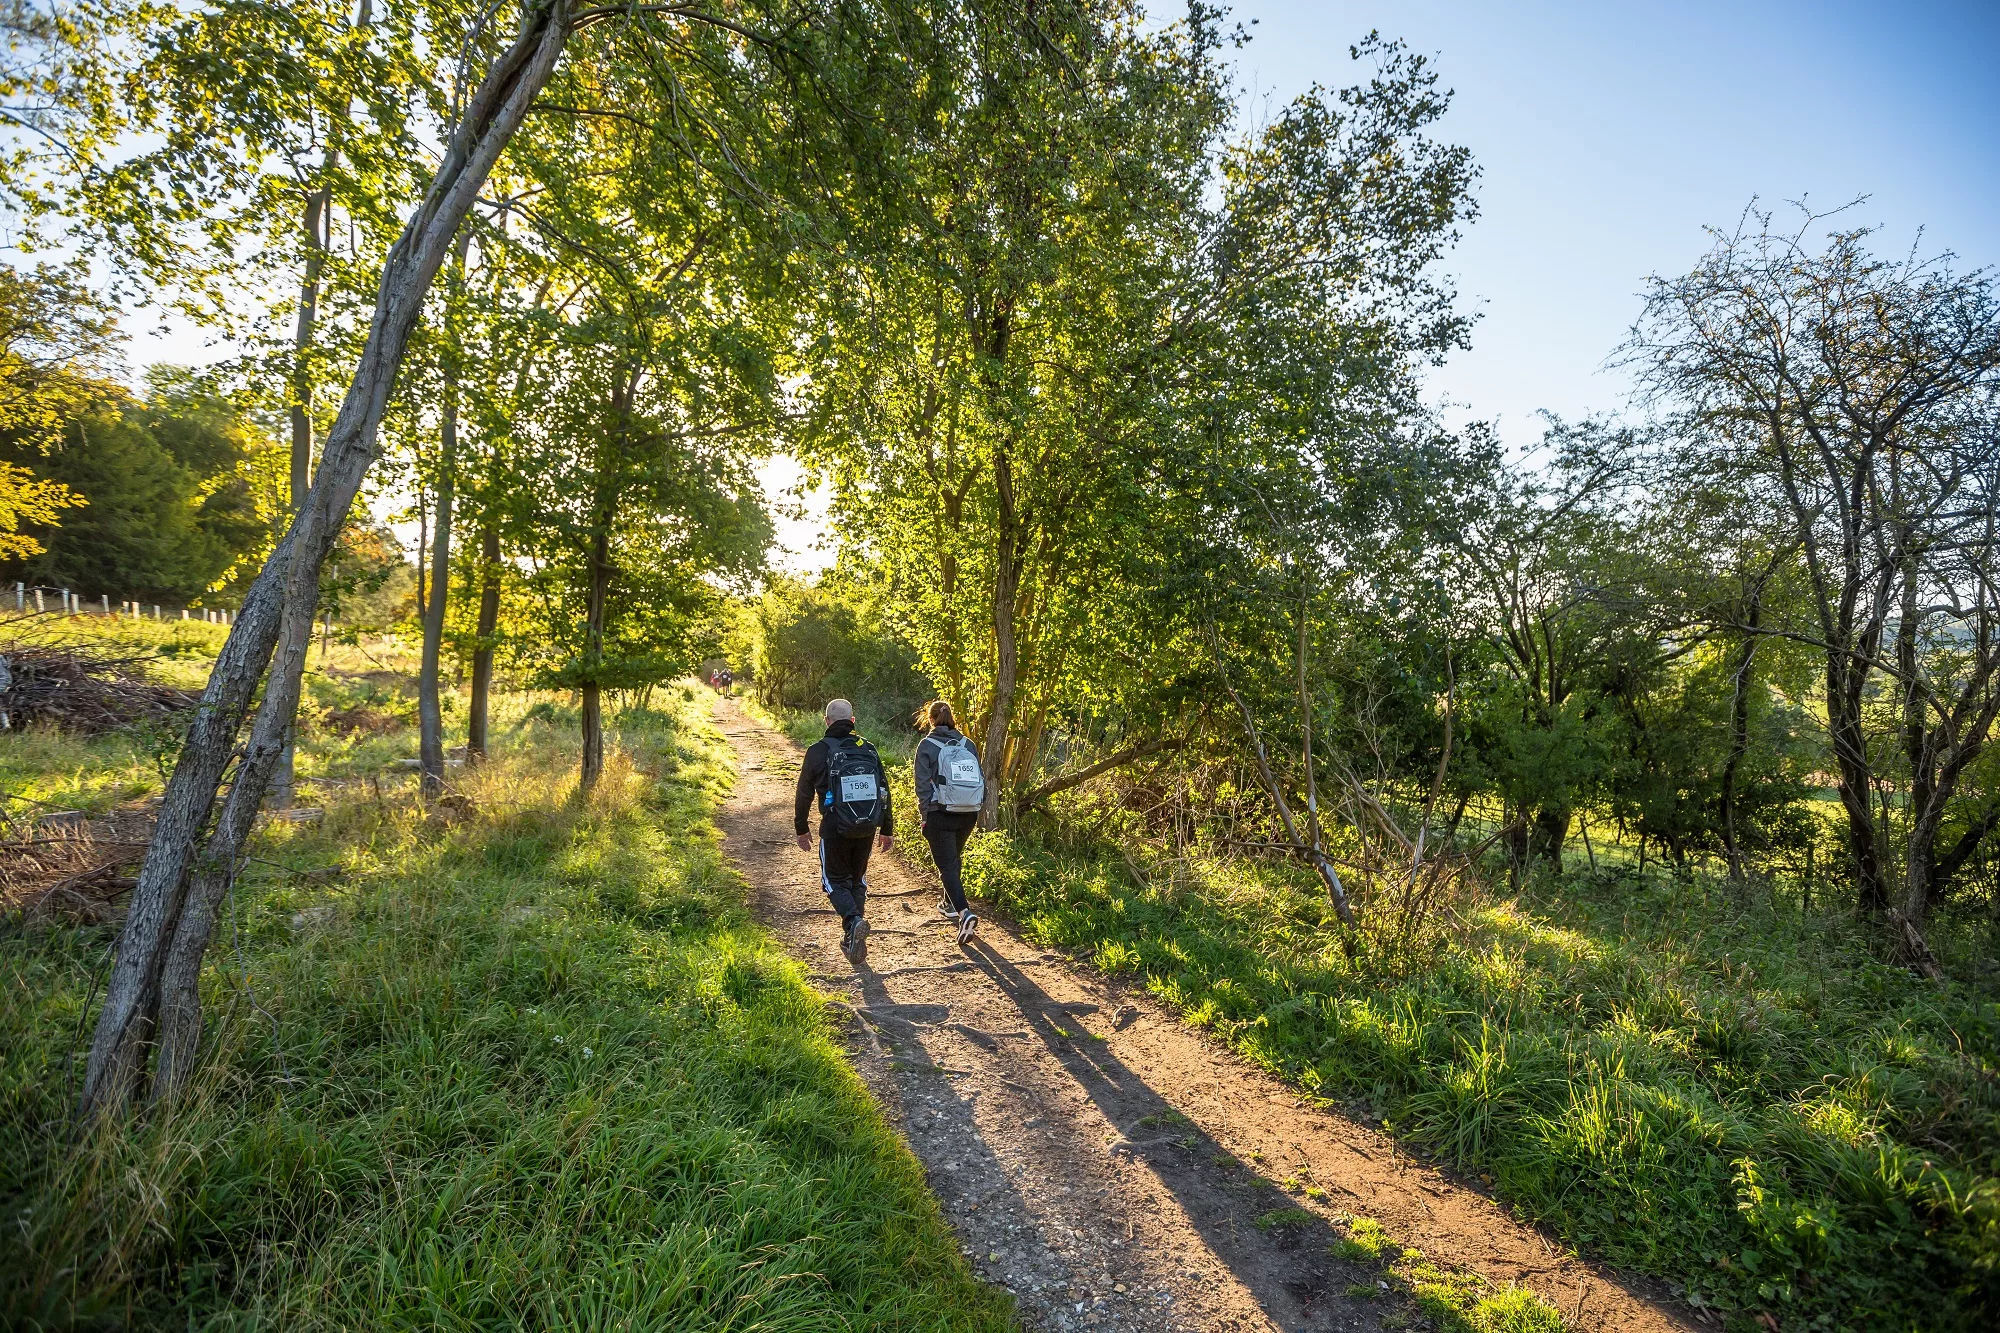 Two hikers walk along a sunlit lane with trees on either side.